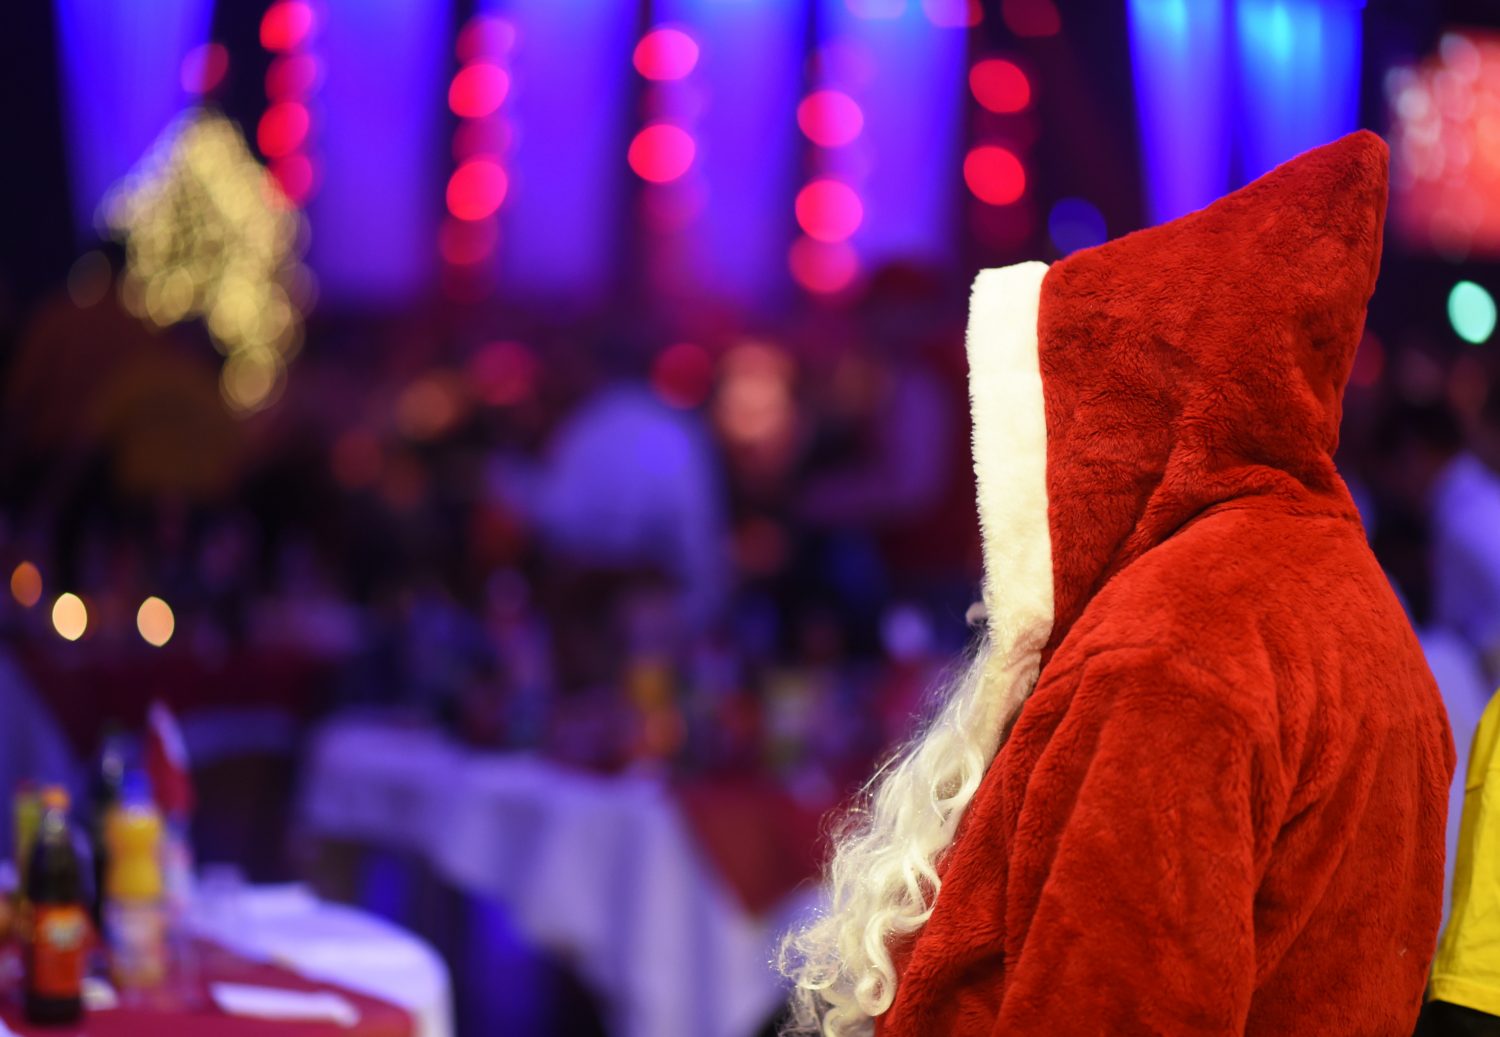 A man dressed as Santa Claus greets guests during a traditional Christmas party for homeless people and others in need at Estrel Hotel in Berlin, Germany, 21 December 2015. Warm clothes, small gifts and a show programme are offered to the guests in addition to roast goose and beer. The event has been held by German singer Frank Zander, the Diakonisches Werk, a charitable organization of Protestant churches, and Estrel Hotel for 20 years. 3000 people attended the party this year. Photo: JENS KALAENE/dpa